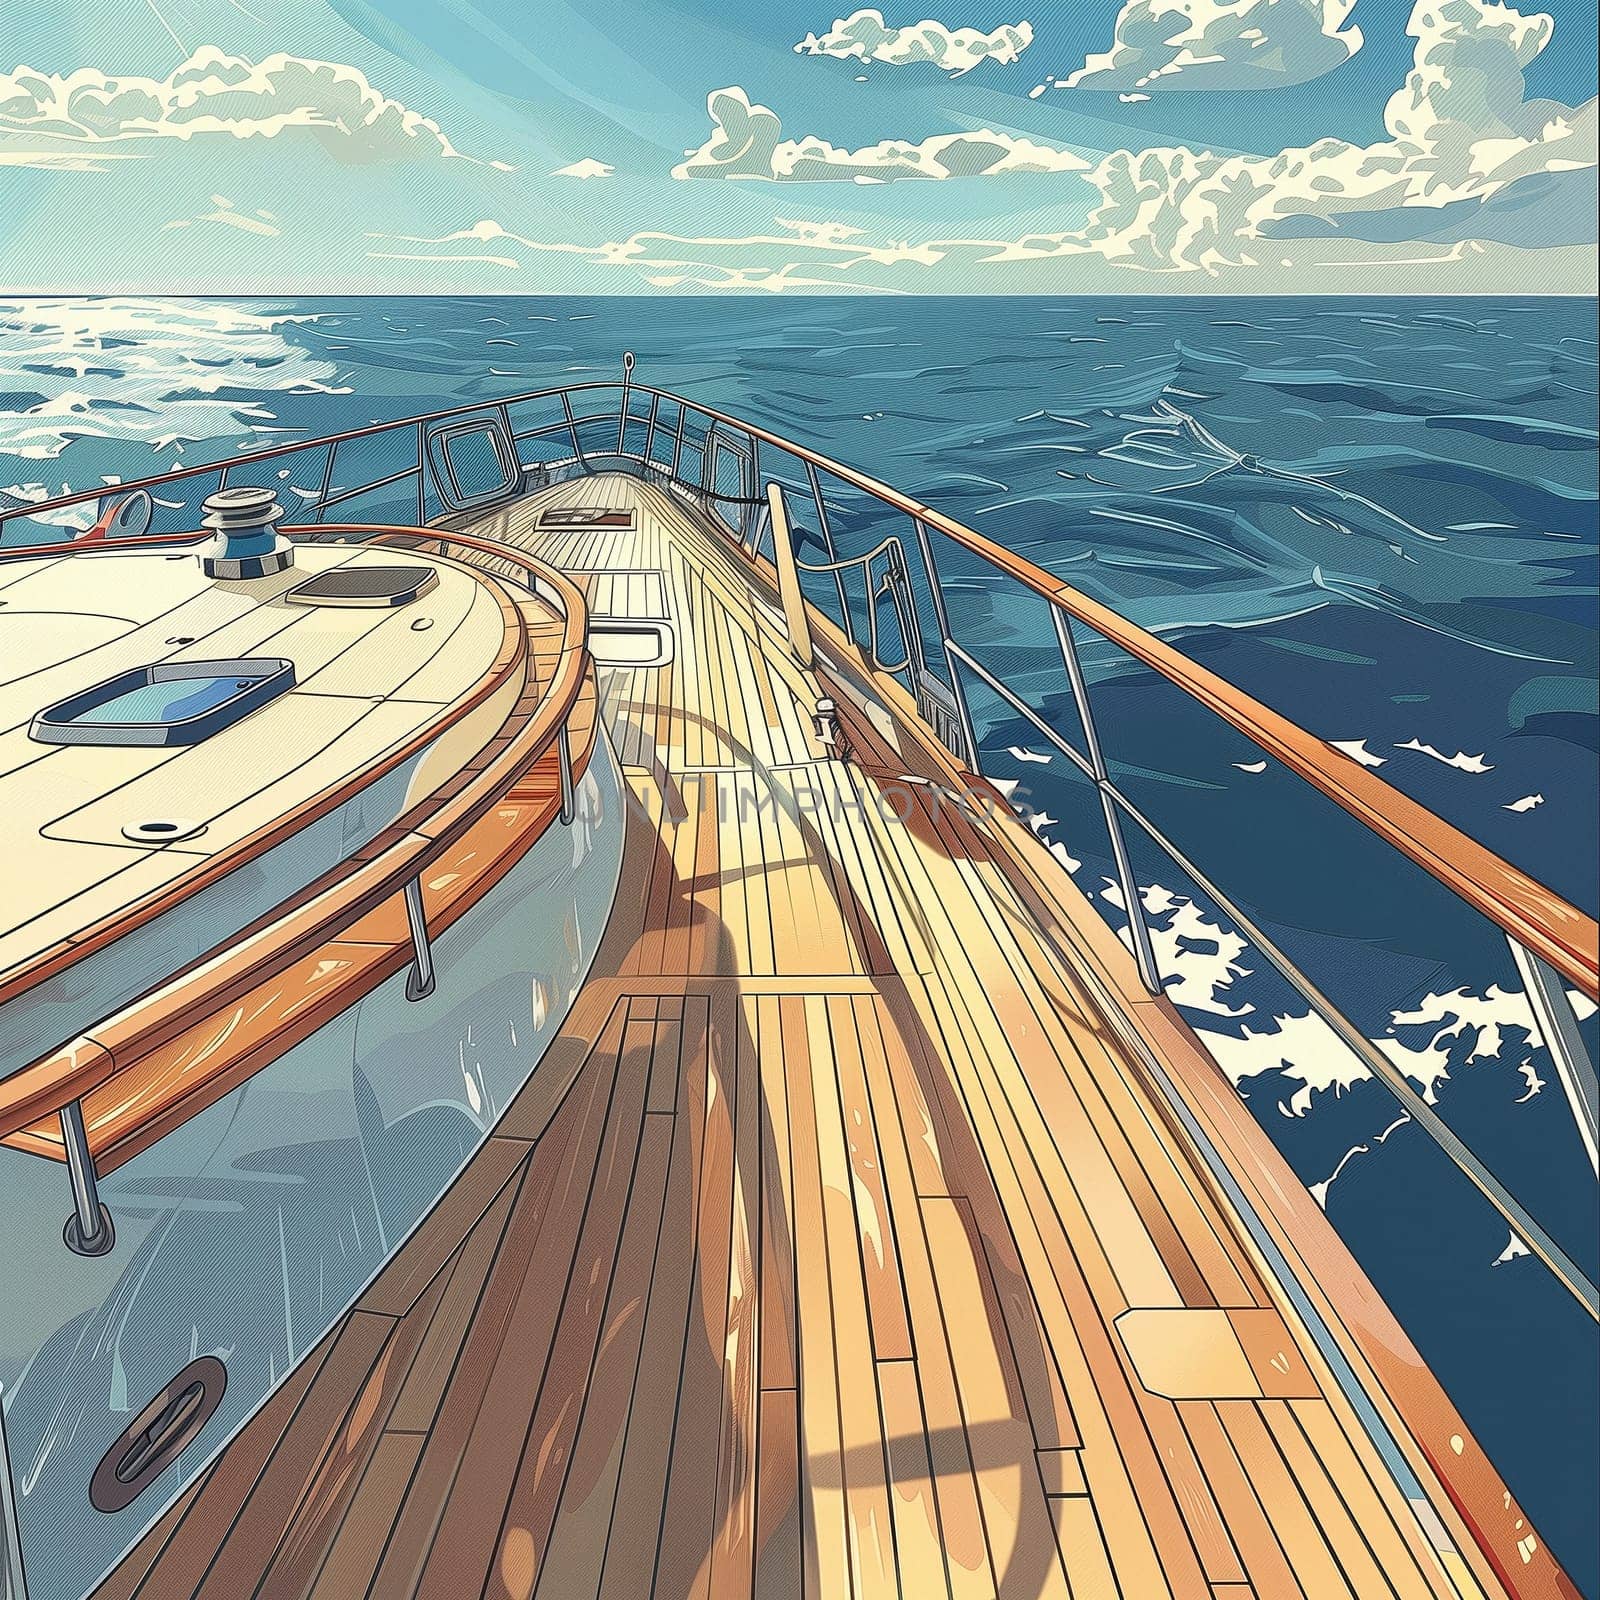 A yacht racing on the waves of the sea. Vintage anime style. High quality illustration